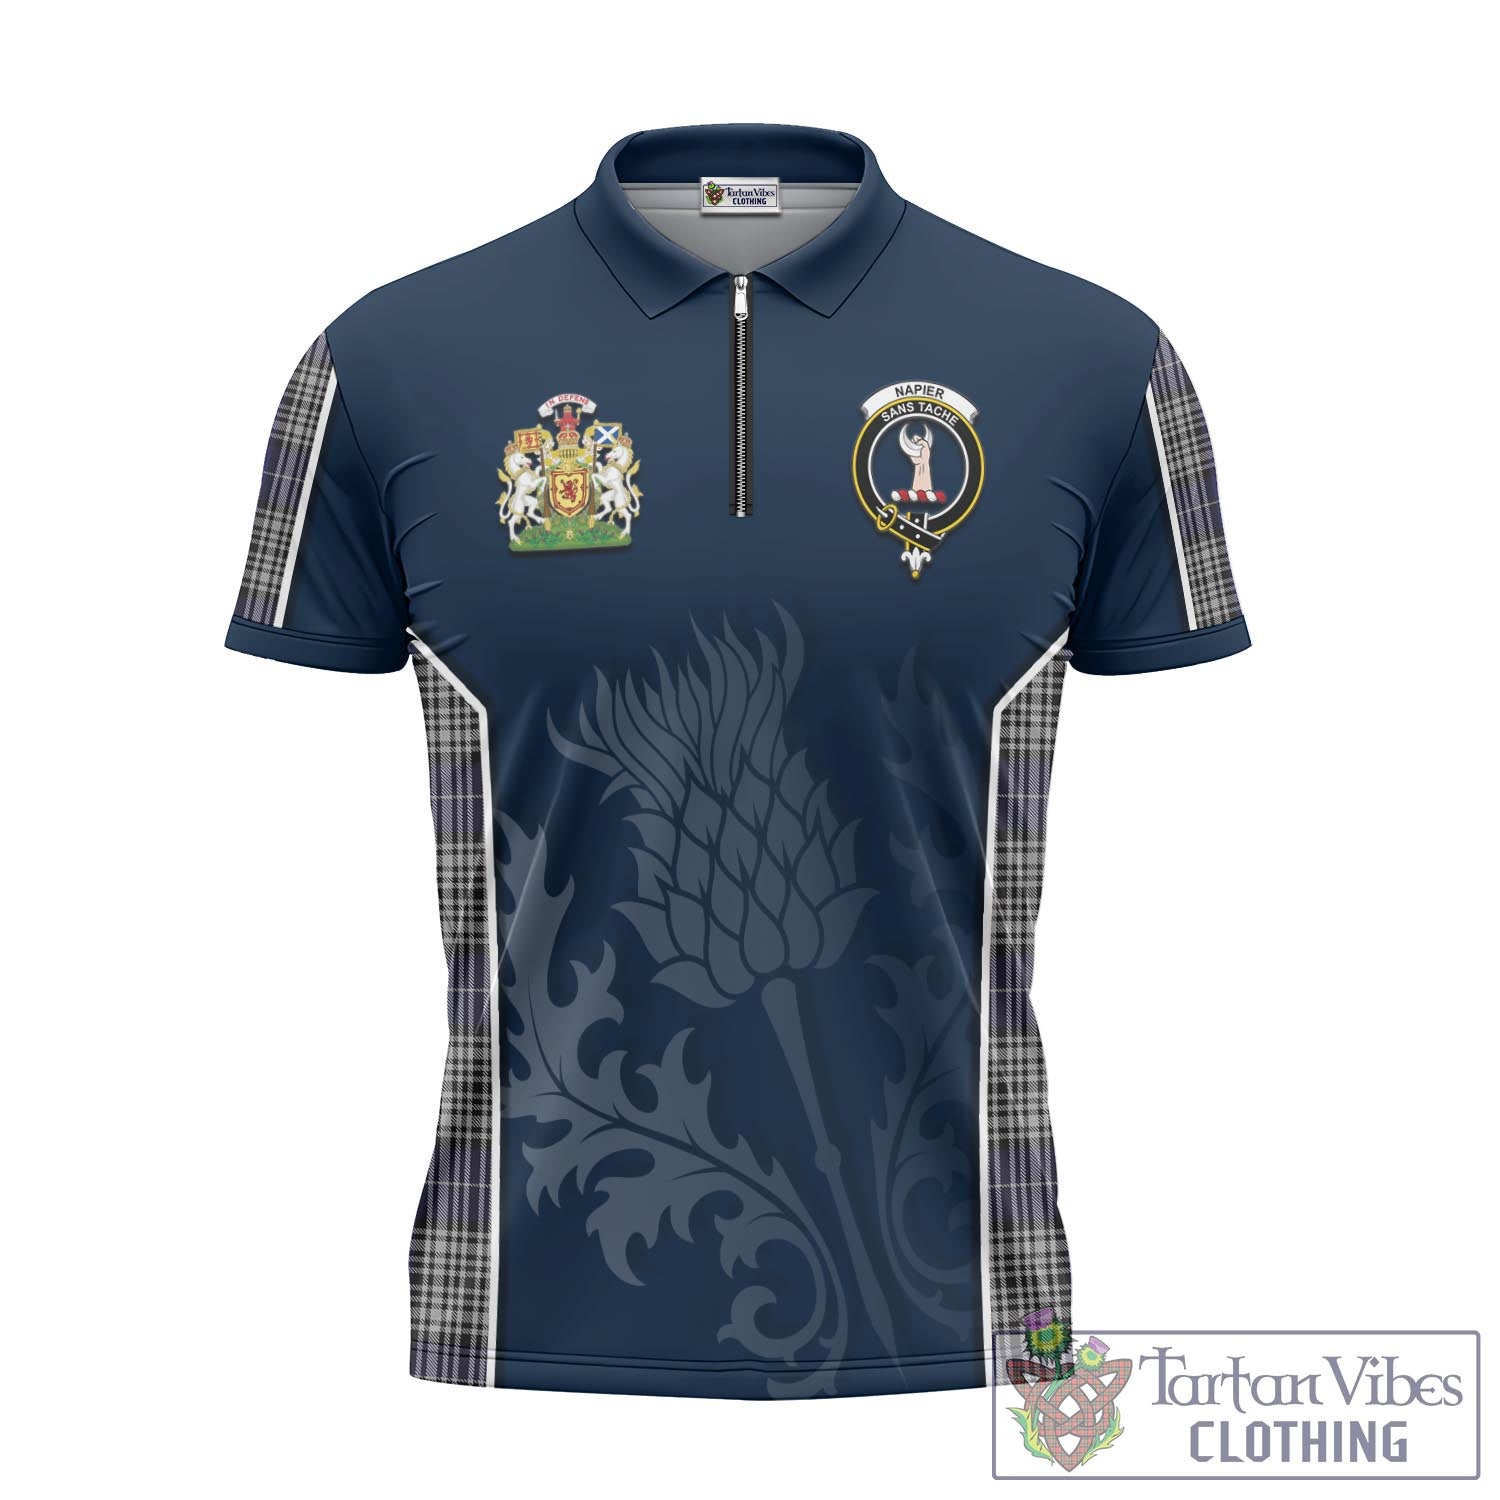 Tartan Vibes Clothing Napier Tartan Zipper Polo Shirt with Family Crest and Scottish Thistle Vibes Sport Style